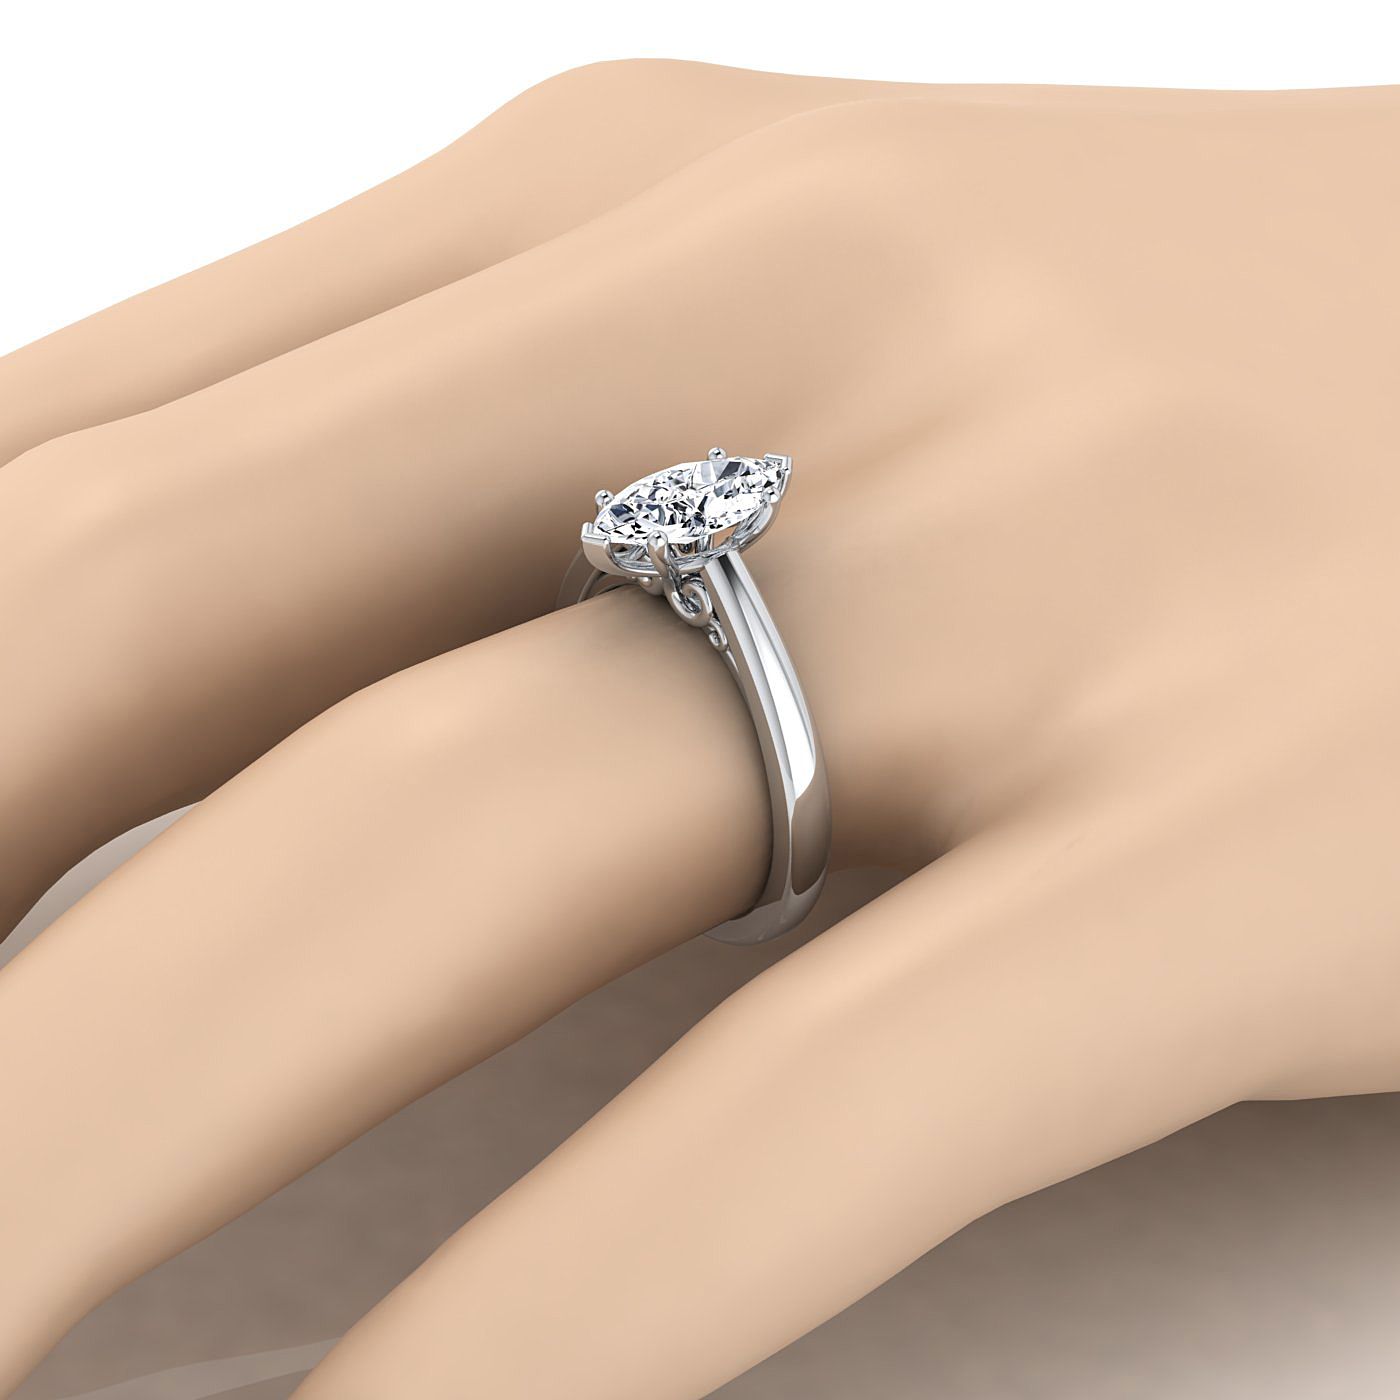 14K White Gold Marquise  Scroll Gallery Comfort Fit Solitaire Engagement Ring